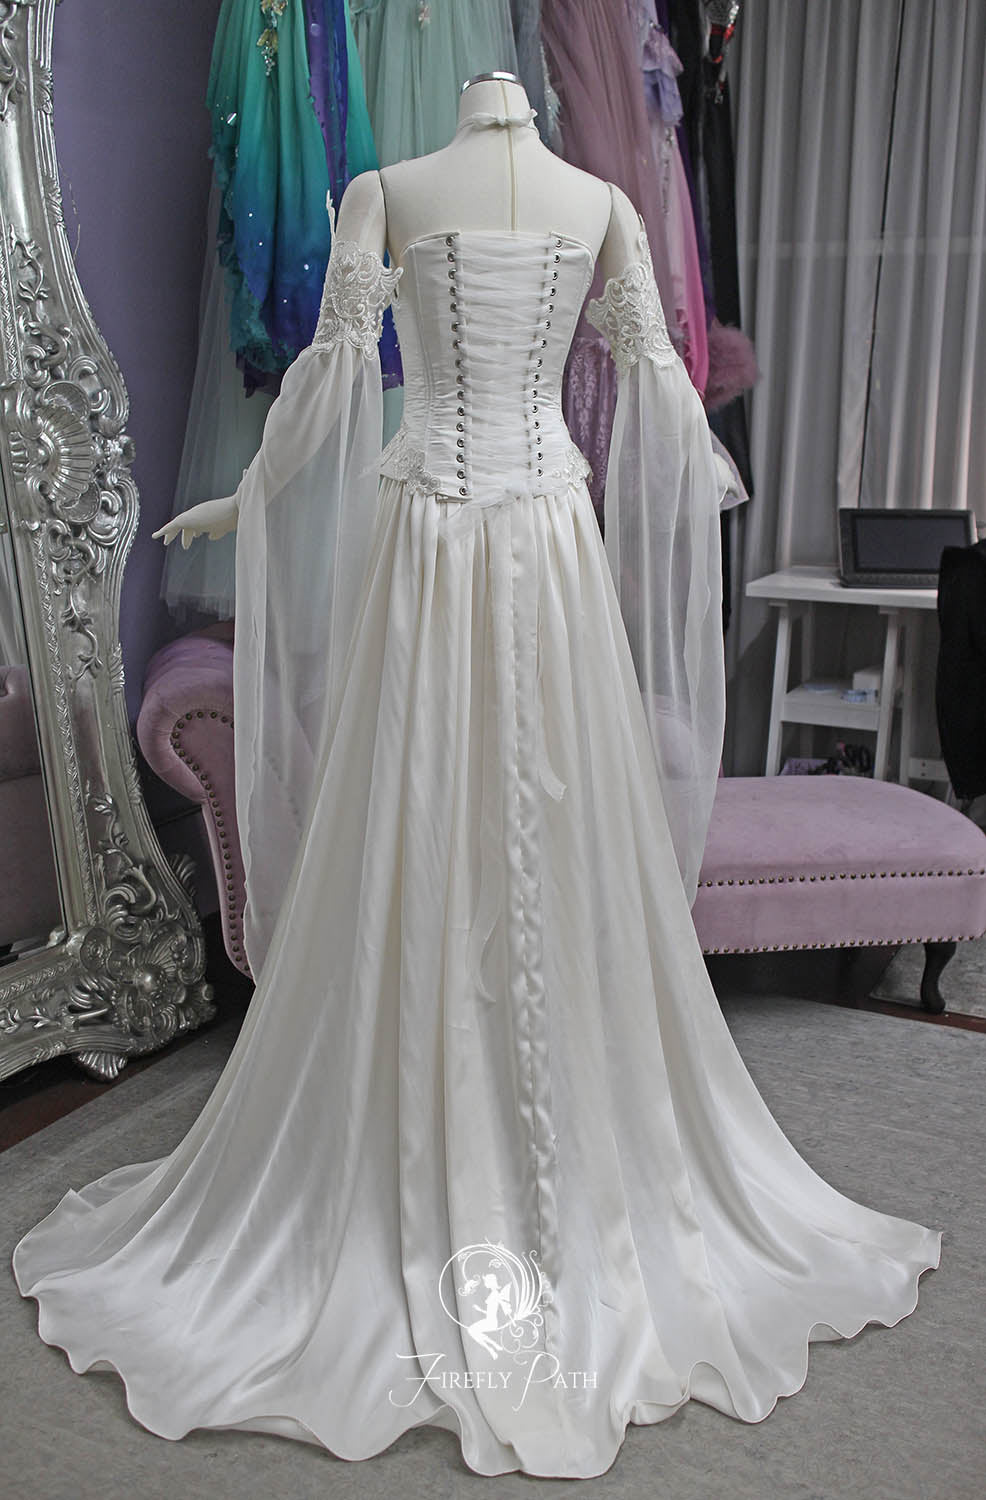 Medieval Elven Cape Hood Medieval Wedding Dress With Long Sleeves And Lace  Embroidery Renaissance Fantasy Victorian Bride Gown From Alegant_lady, $199  | DHgate.Com